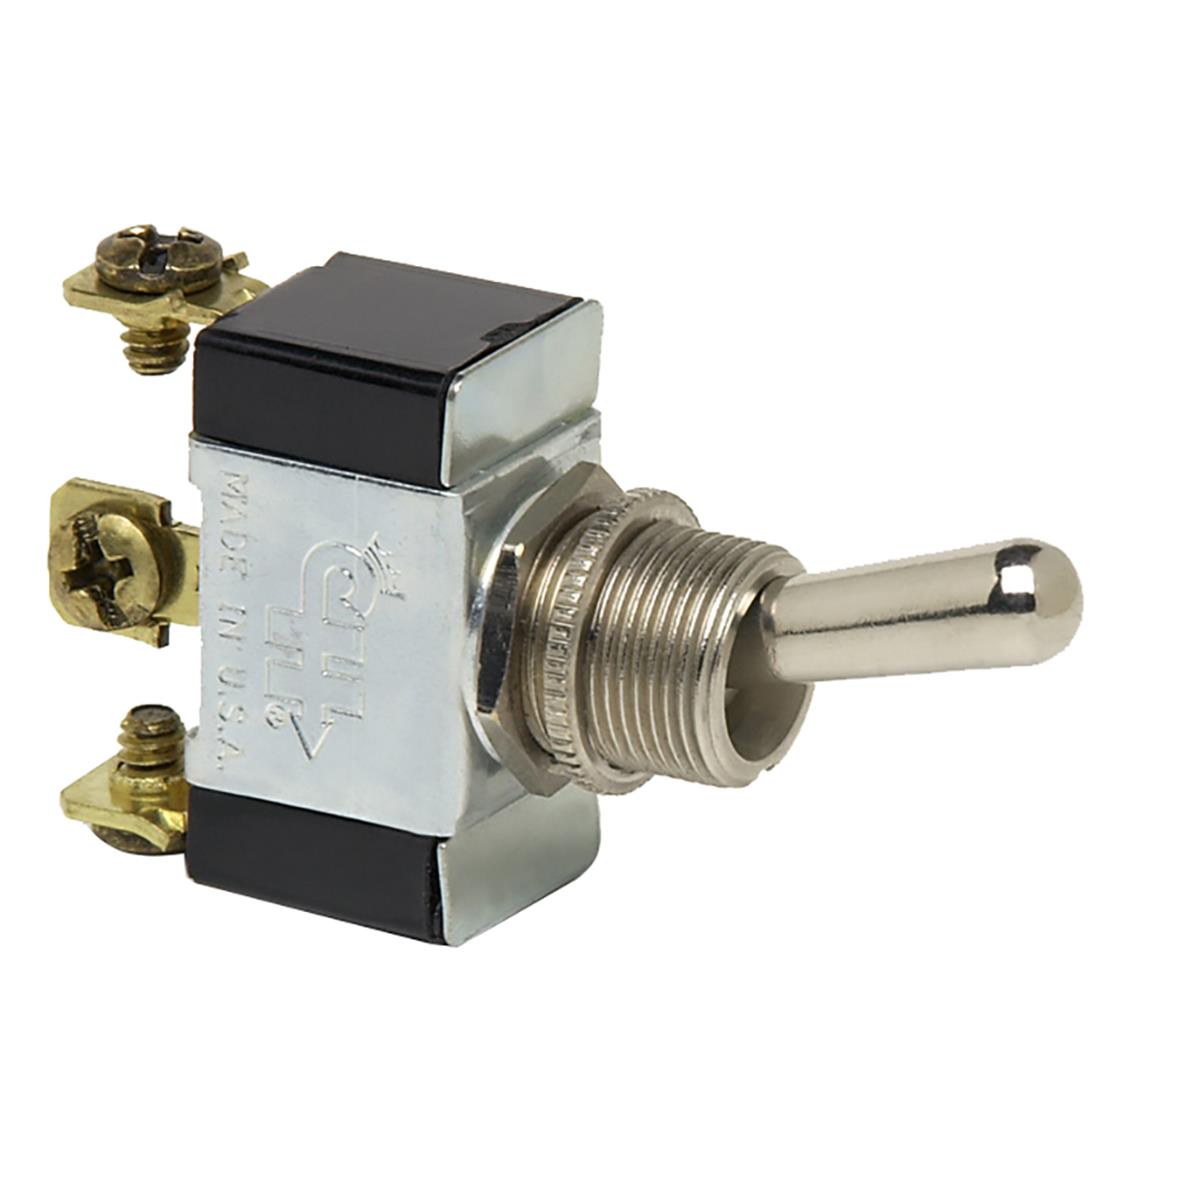 On-off-on Spdt 3 Wire Heavy Duty Toggle Switch